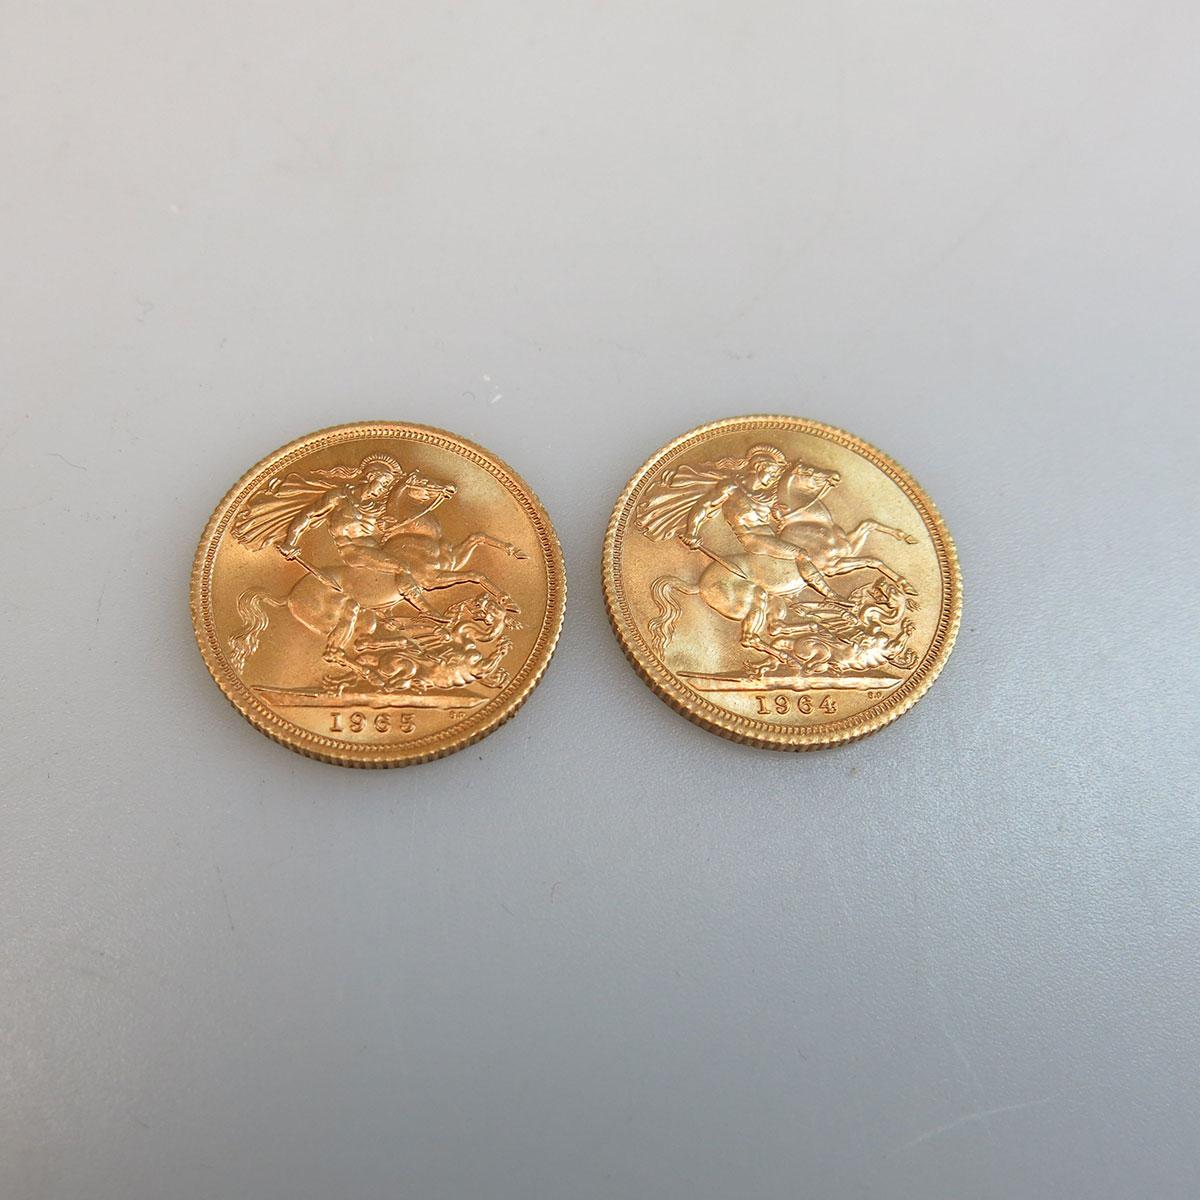 2 English Gold Sovereigns